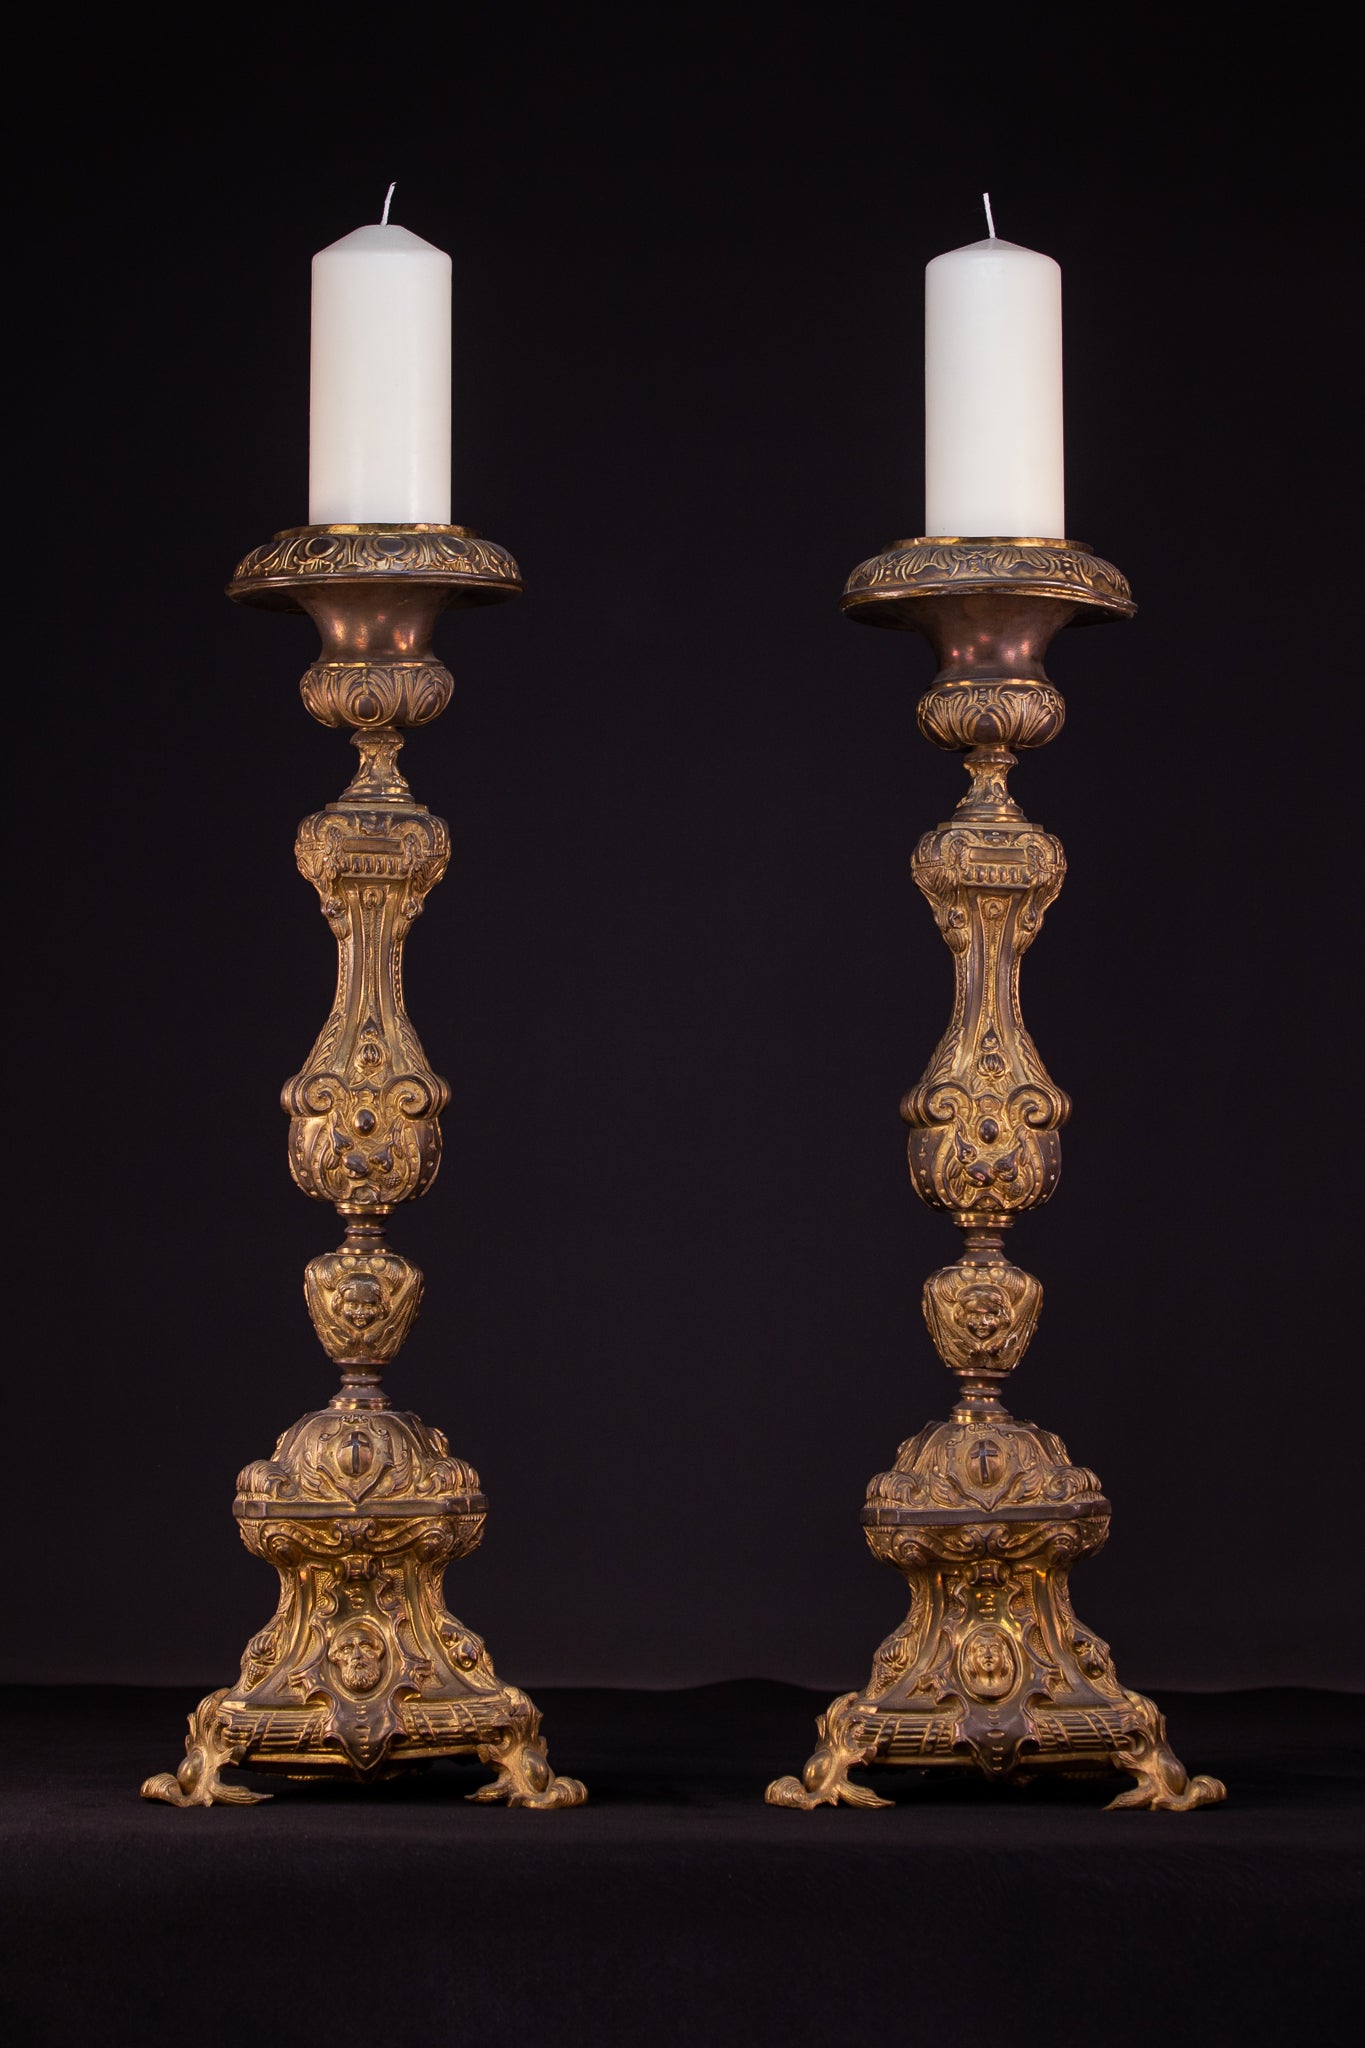 Pair of French Baroque Candlesticks | 1700s Antique | 30" / 77 cm